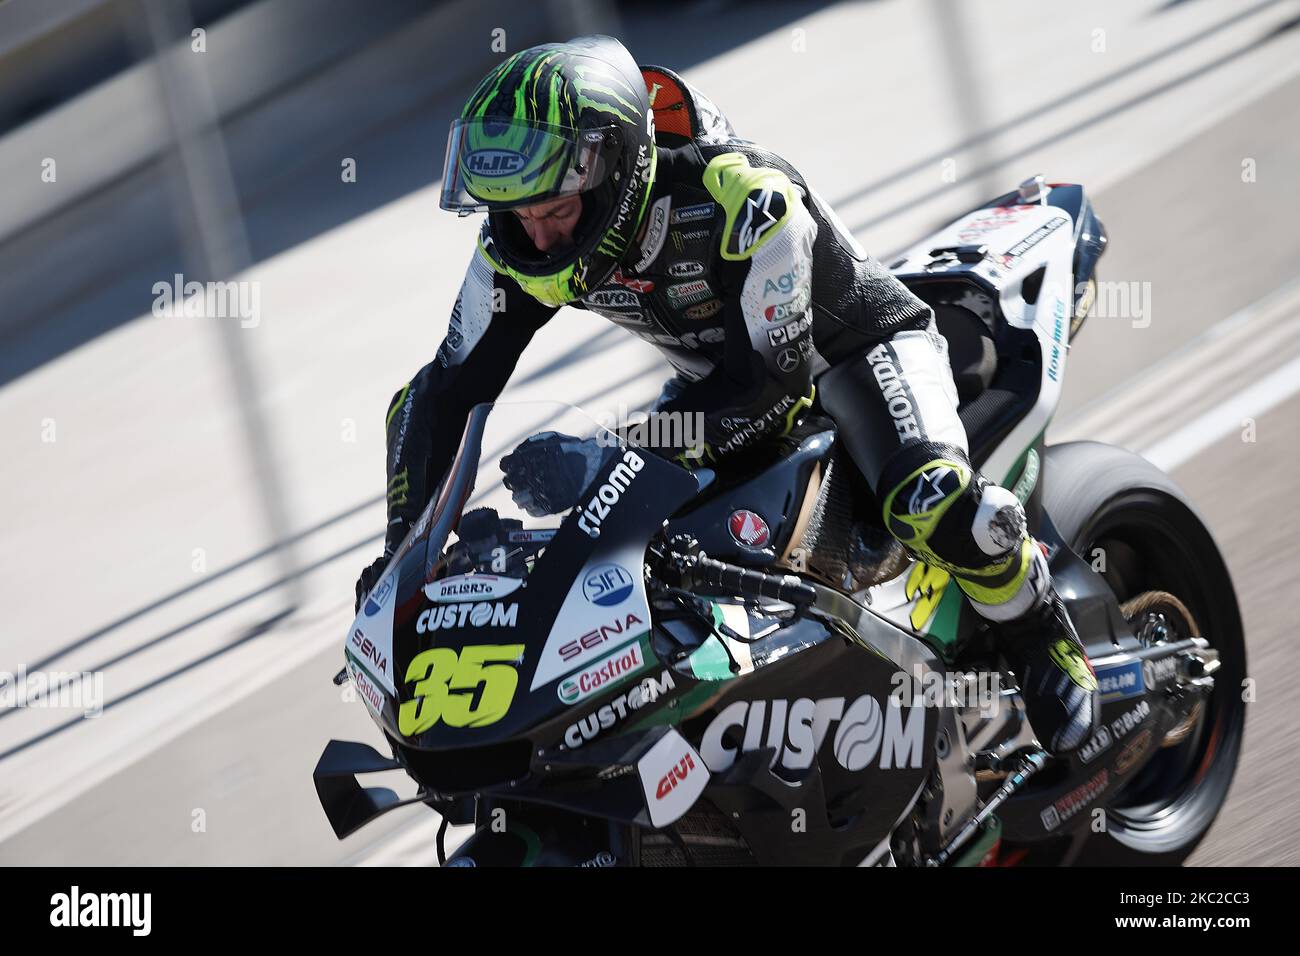 Cal Crutchlow (35) of England and LCR Honda Castrol during the free practice for the MotoGP of Teruel at Motorland Aragon Circuit on October 23, 2020 in Alcaniz, Spain. (Photo by Jose Breton/Pics Action/NurPhoto) Stock Photo